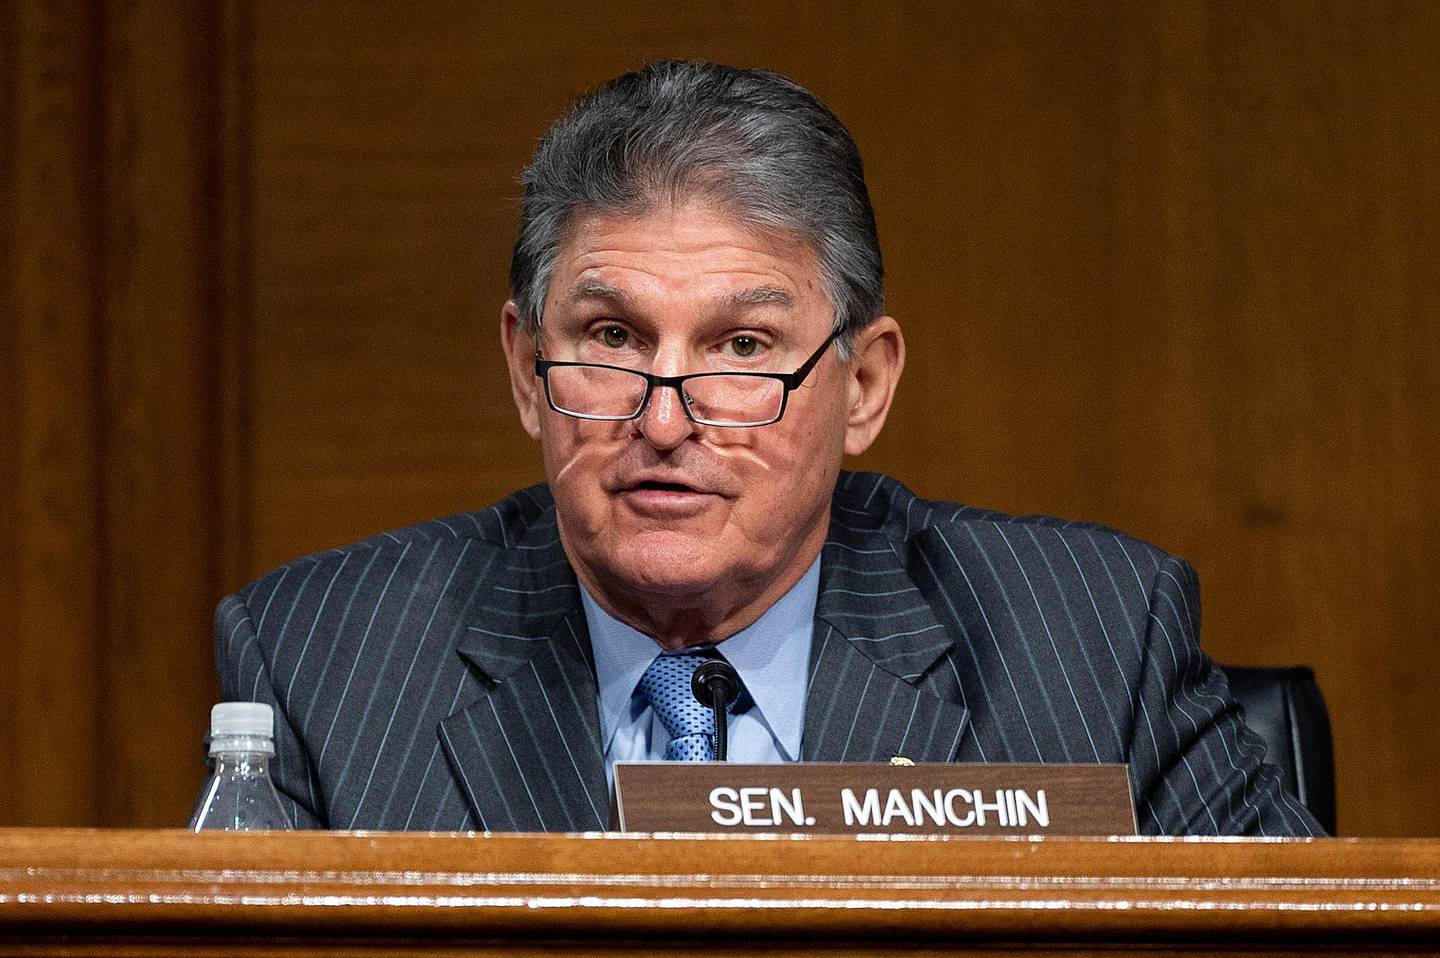 Ranking Member Joe Manchin, D-WV, speaks during a hearing to examine the nomination of Former Michigan Governor Jennifer Granholm to be Secretary of Energy, on Capitol Hill in Washington, DC, on January 27, 2021. (Photo by JIM WATSON / POOL / AFP)